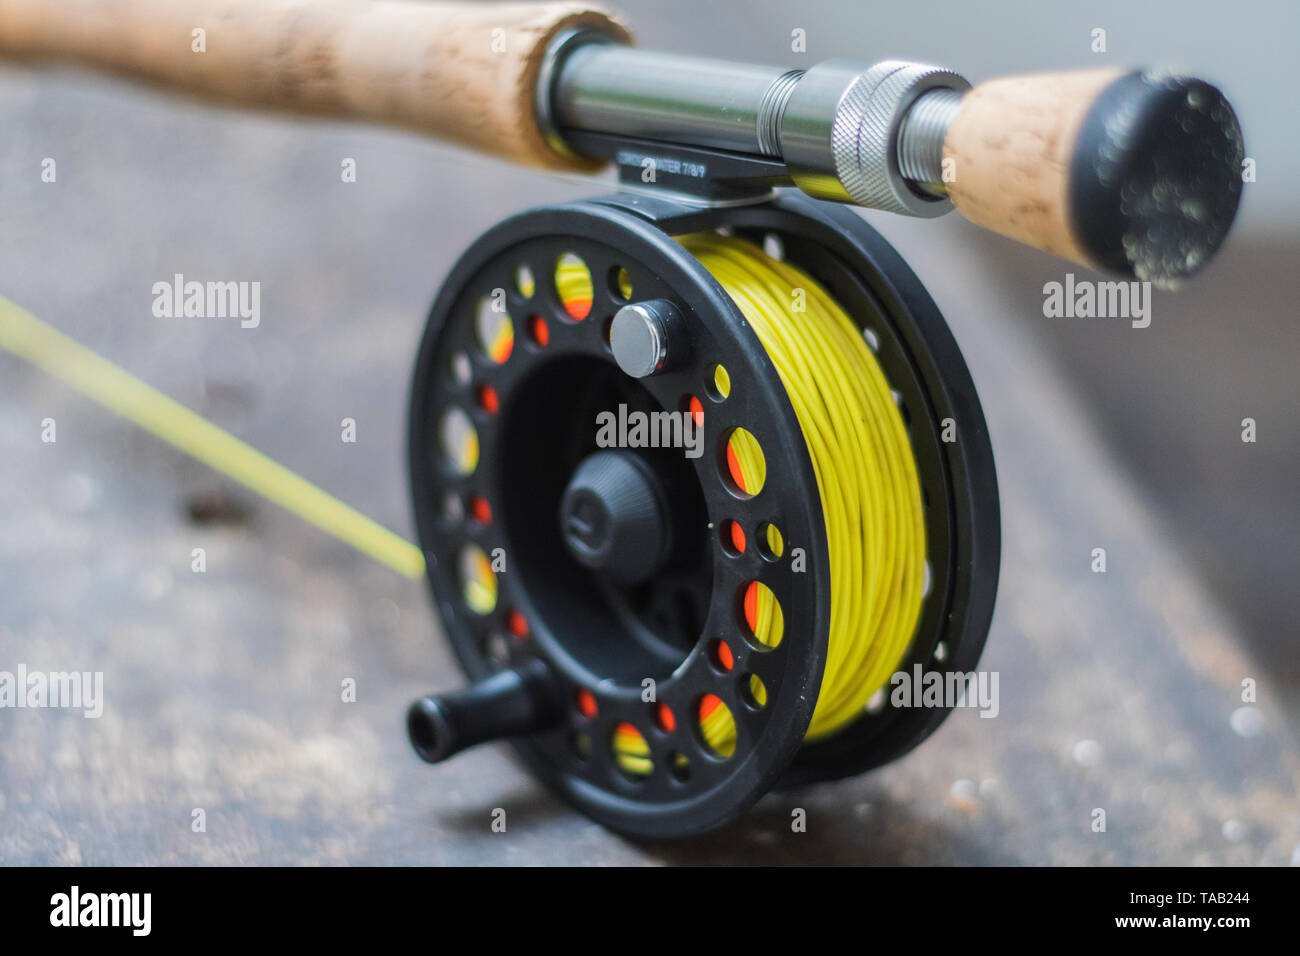 https://c8.alamy.com/comp/TAB244/saltwater-fly-fishing-fly-rod-and-reel-TAB244.jpg